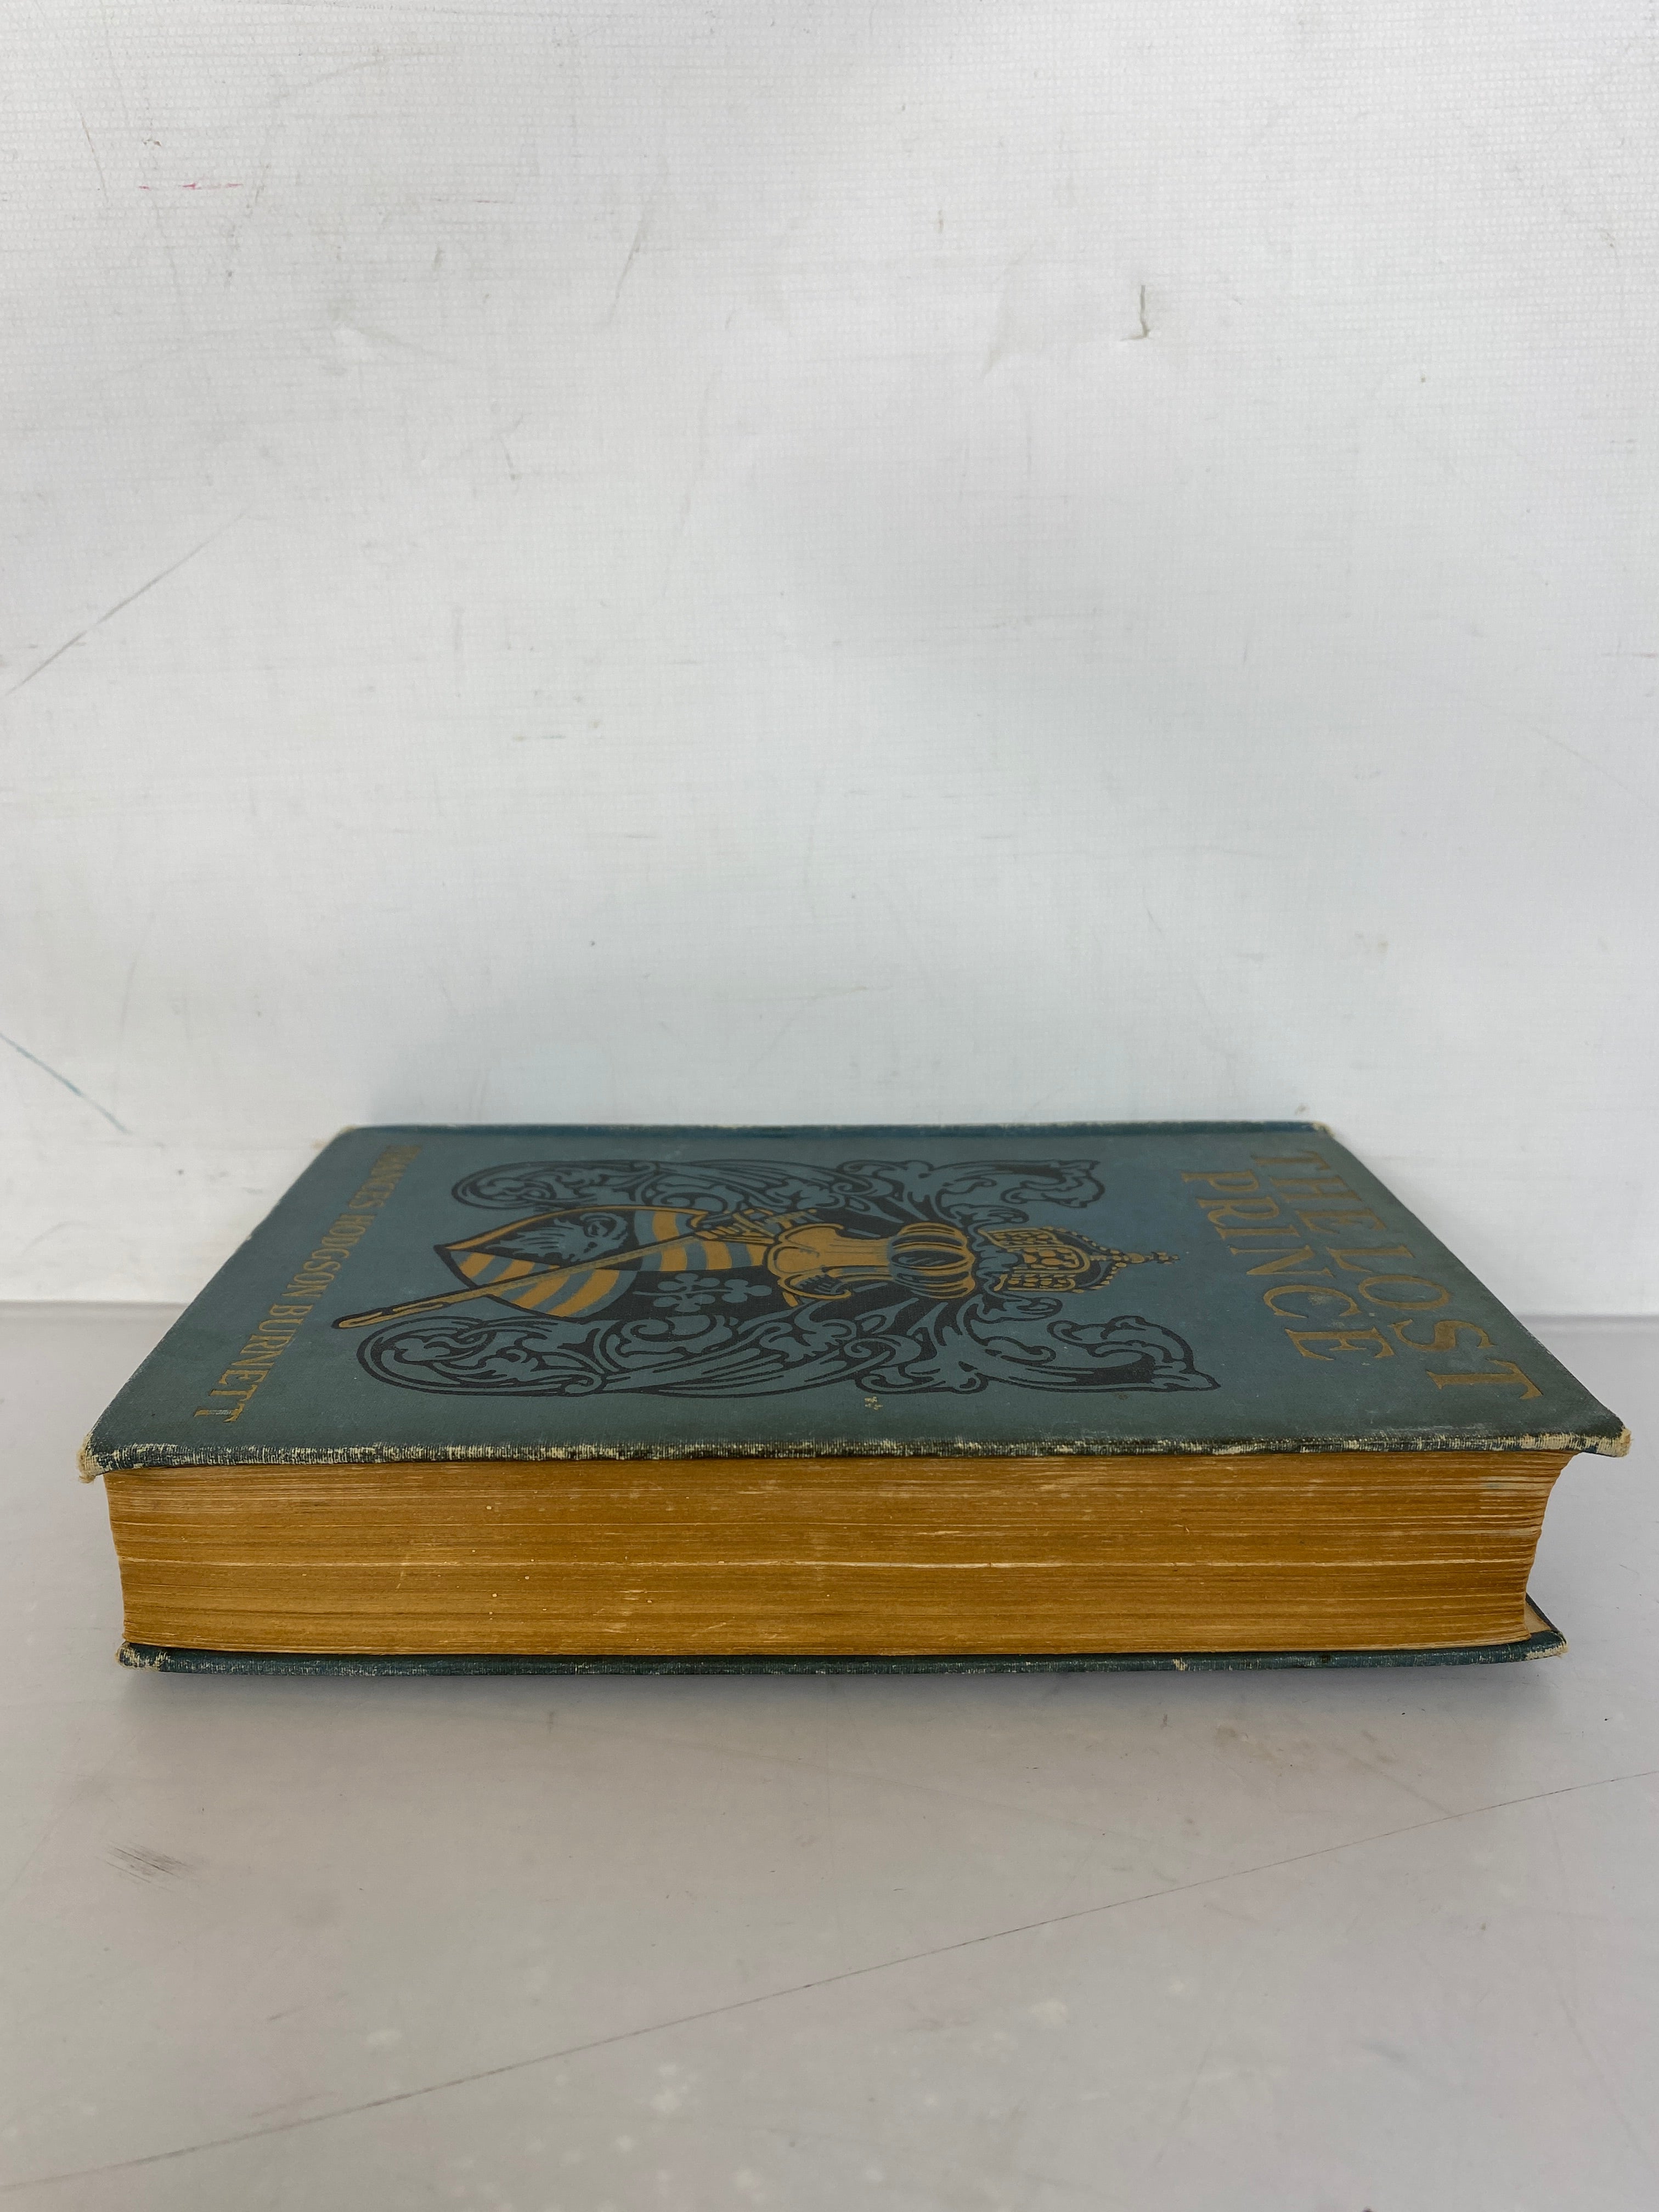 The Lost Prince by Frances Hodgson Burnett First Edition 1915 HC